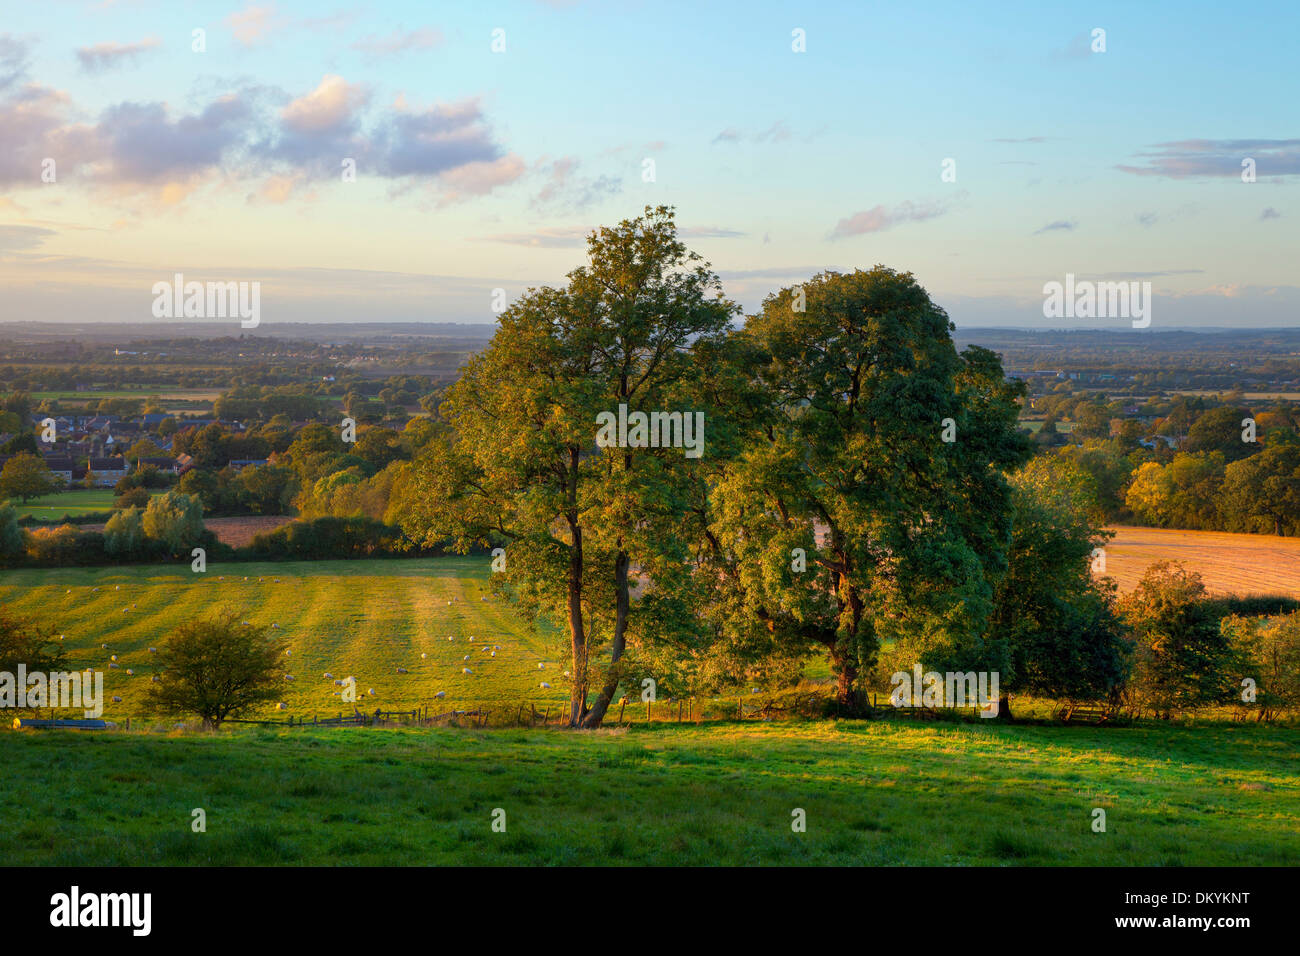 Looking towards Worcestershire from Gloucestershire at sunset, England. Stock Photo